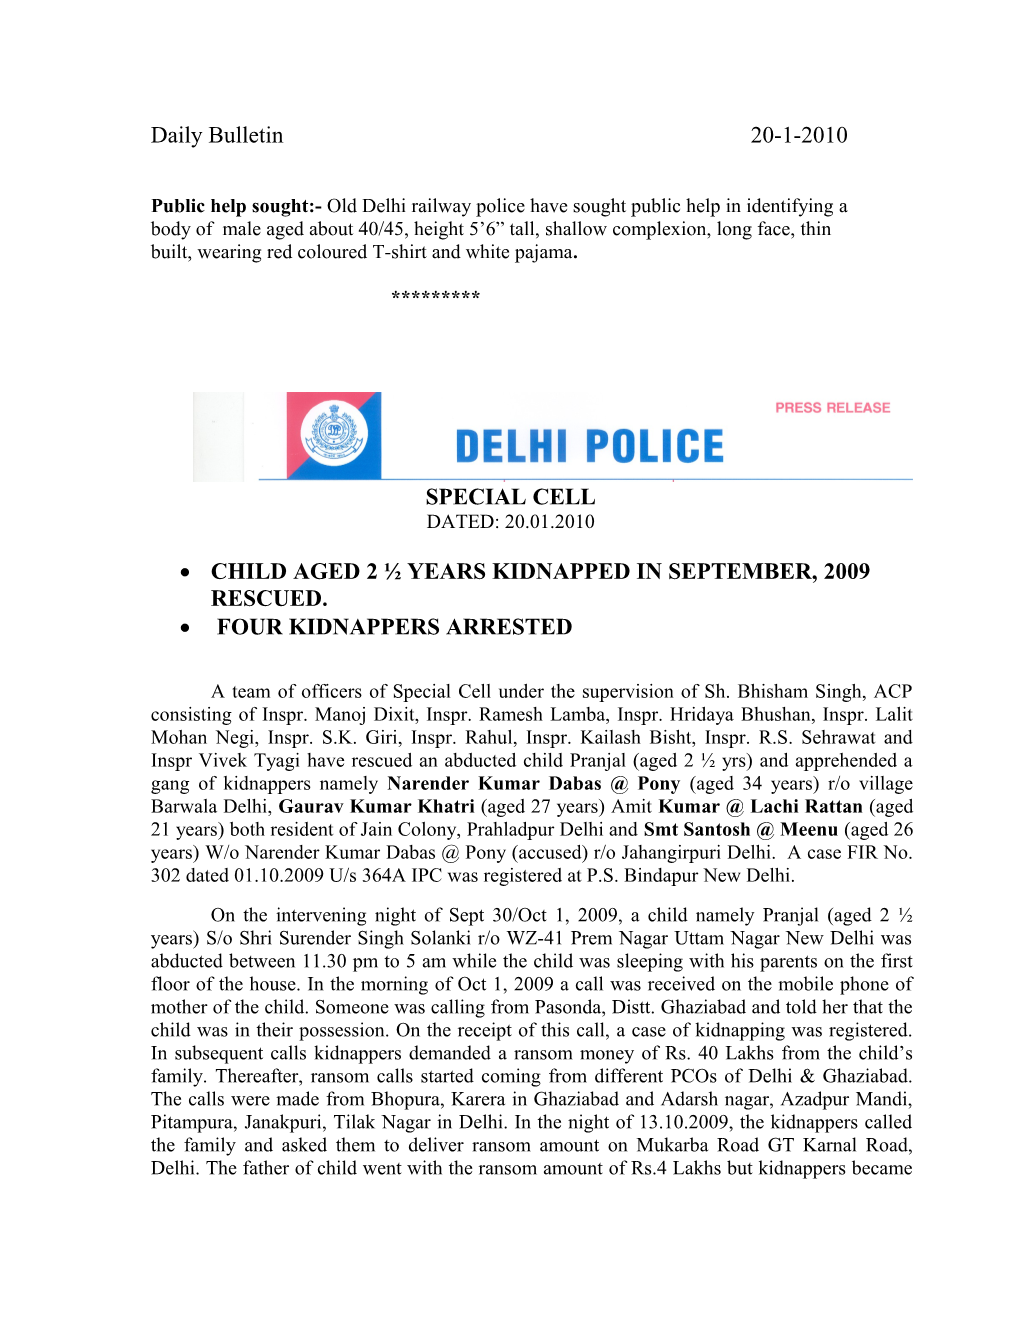 Public Help Sought:- Old Delhi Railway Police Have Sought Public Help in Identifying A